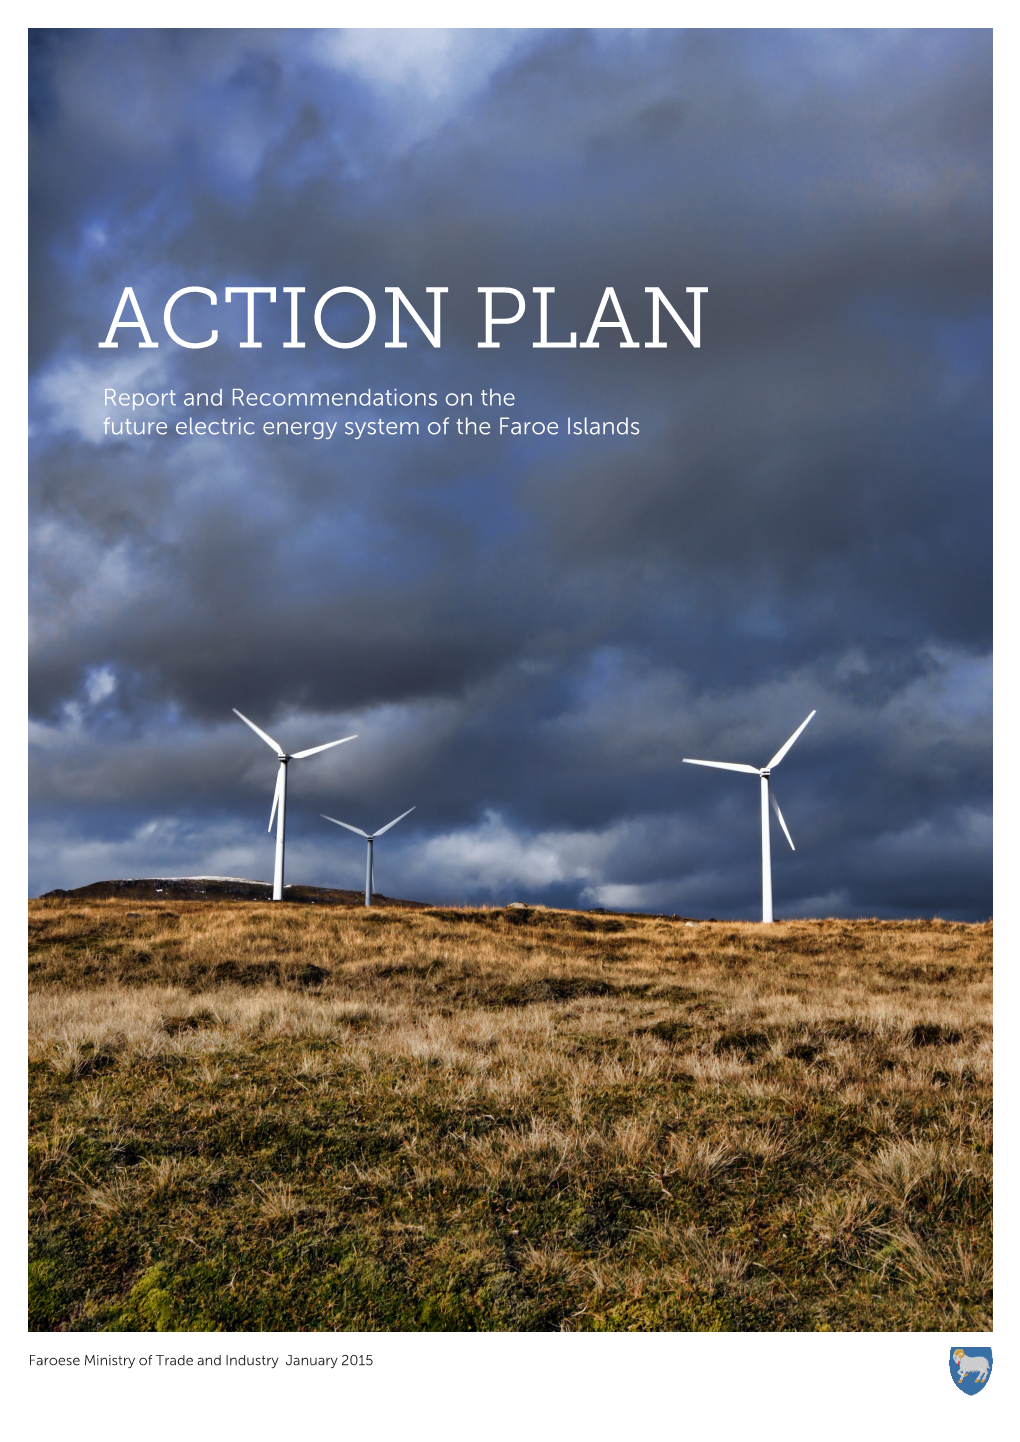 ACTION PLAN Report and Recommendations on the Future Electric Energy System of the Faroe Islands